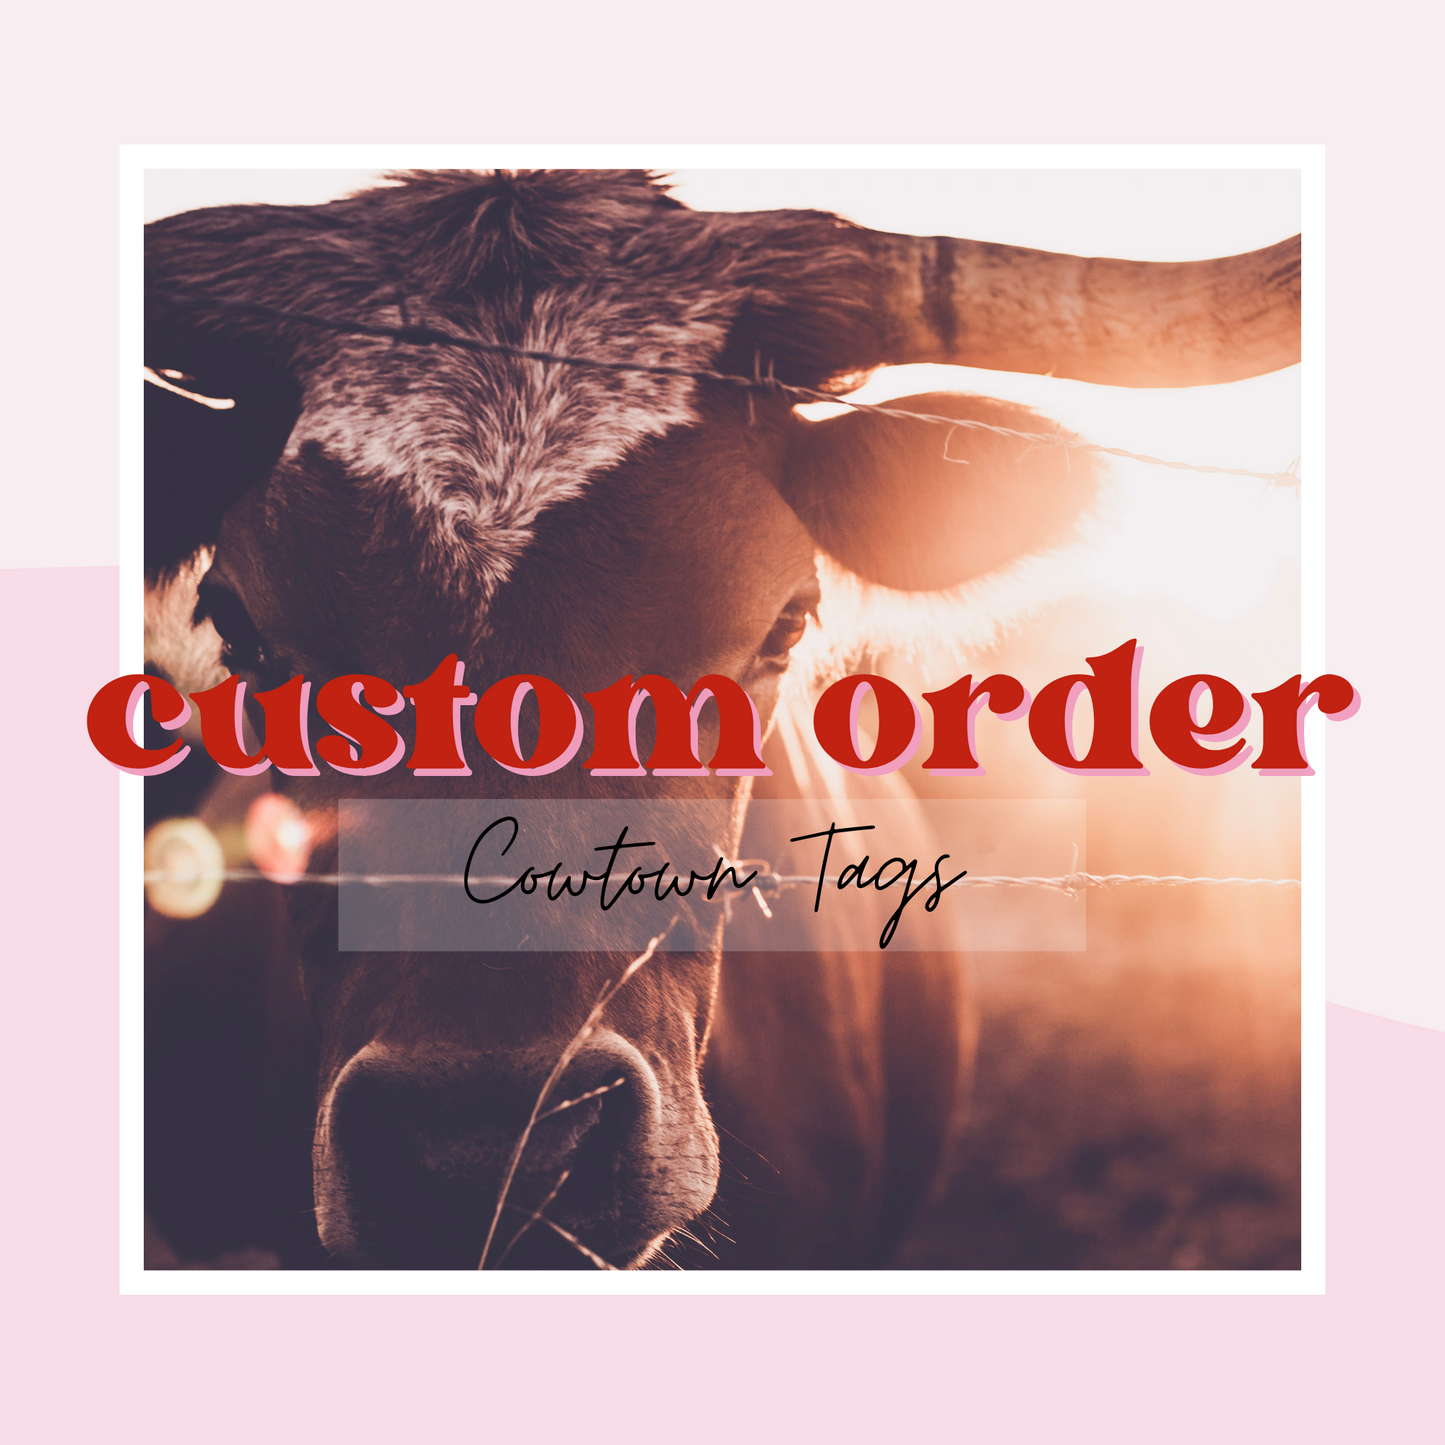 CUSTOM ORDER FOR COWTOWN CORRAL 2022